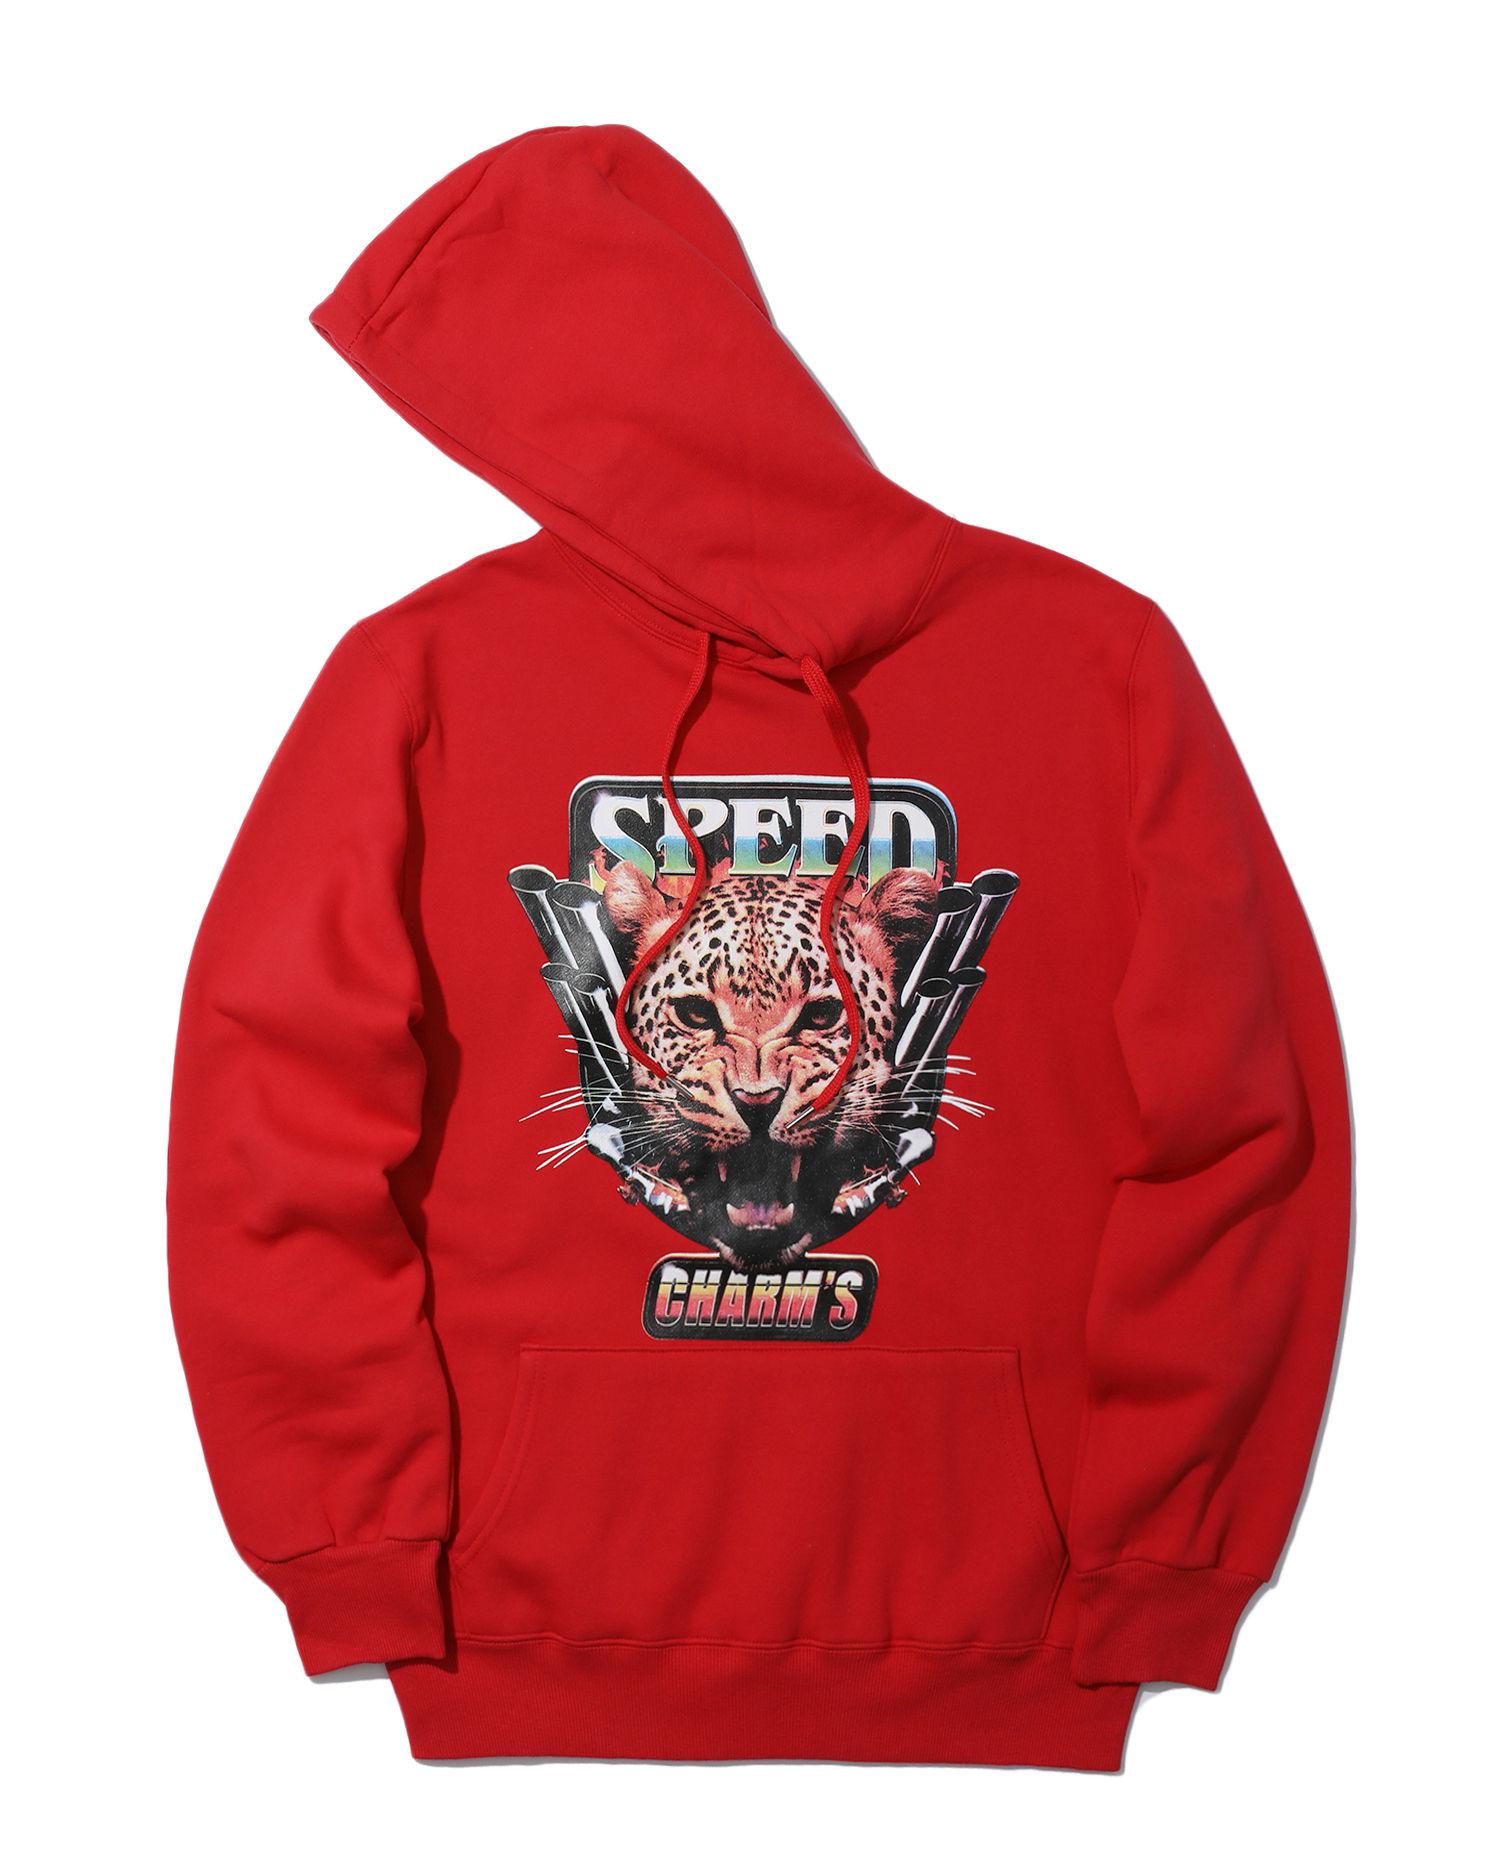 Tiger hoodie by CHARM'S